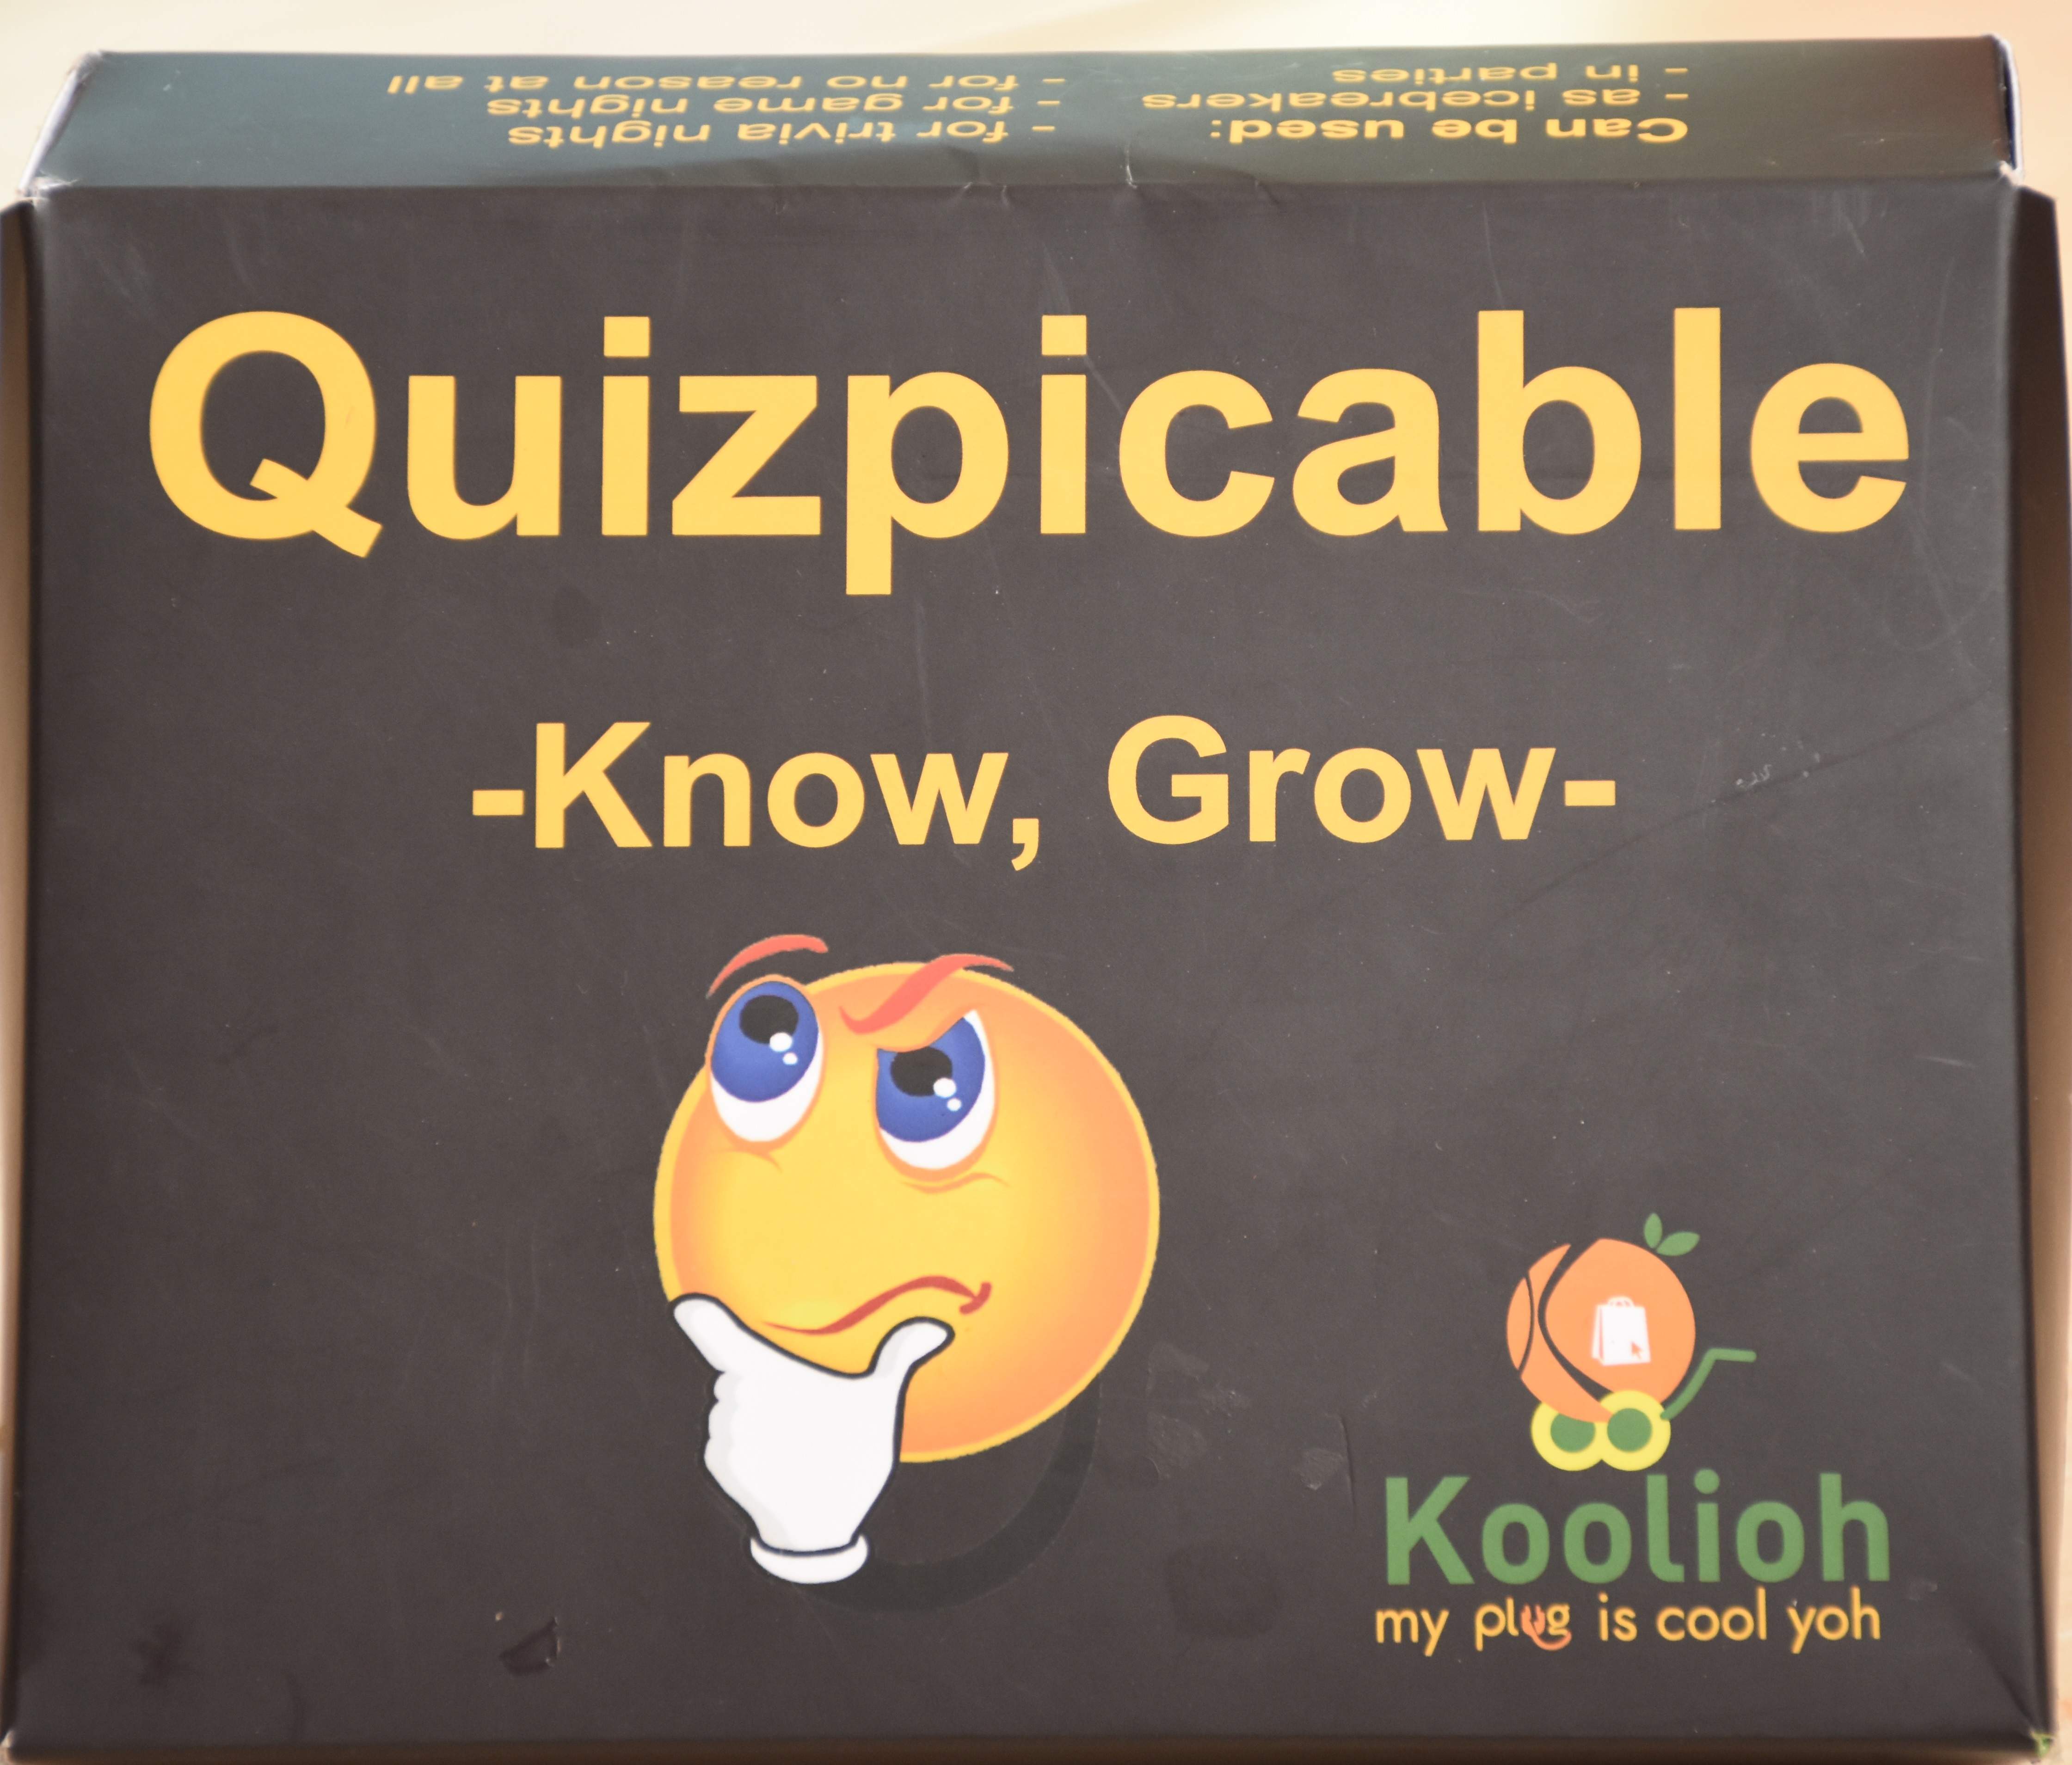 Quizpicable (Trivia/Family game)